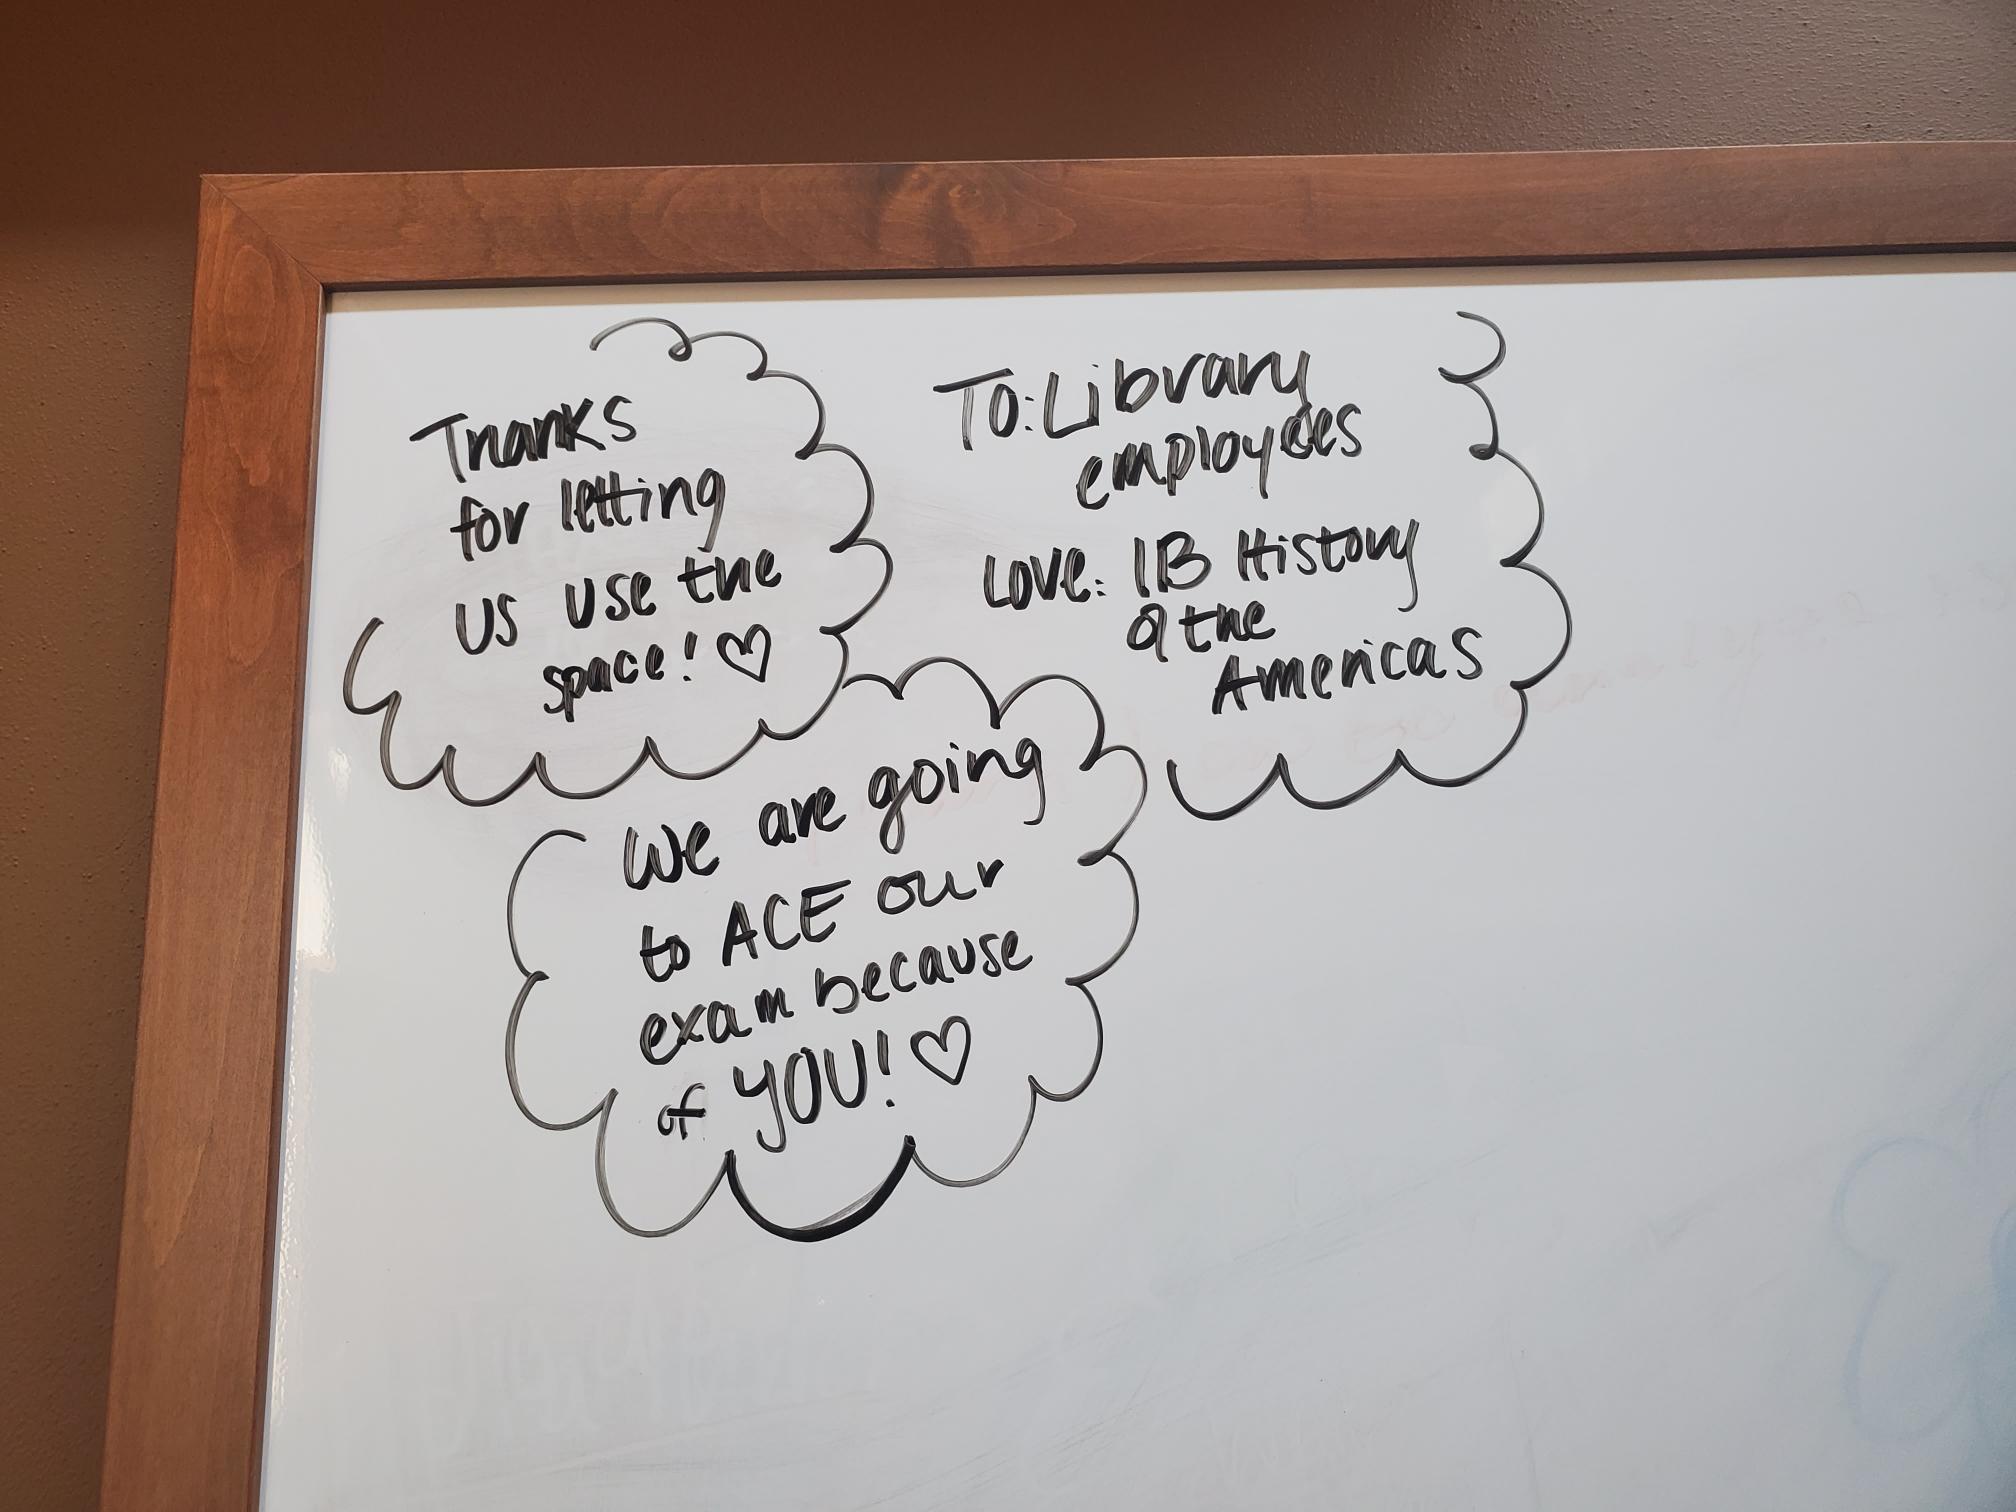 Whiteboard with "thank you" message written to librarians from students